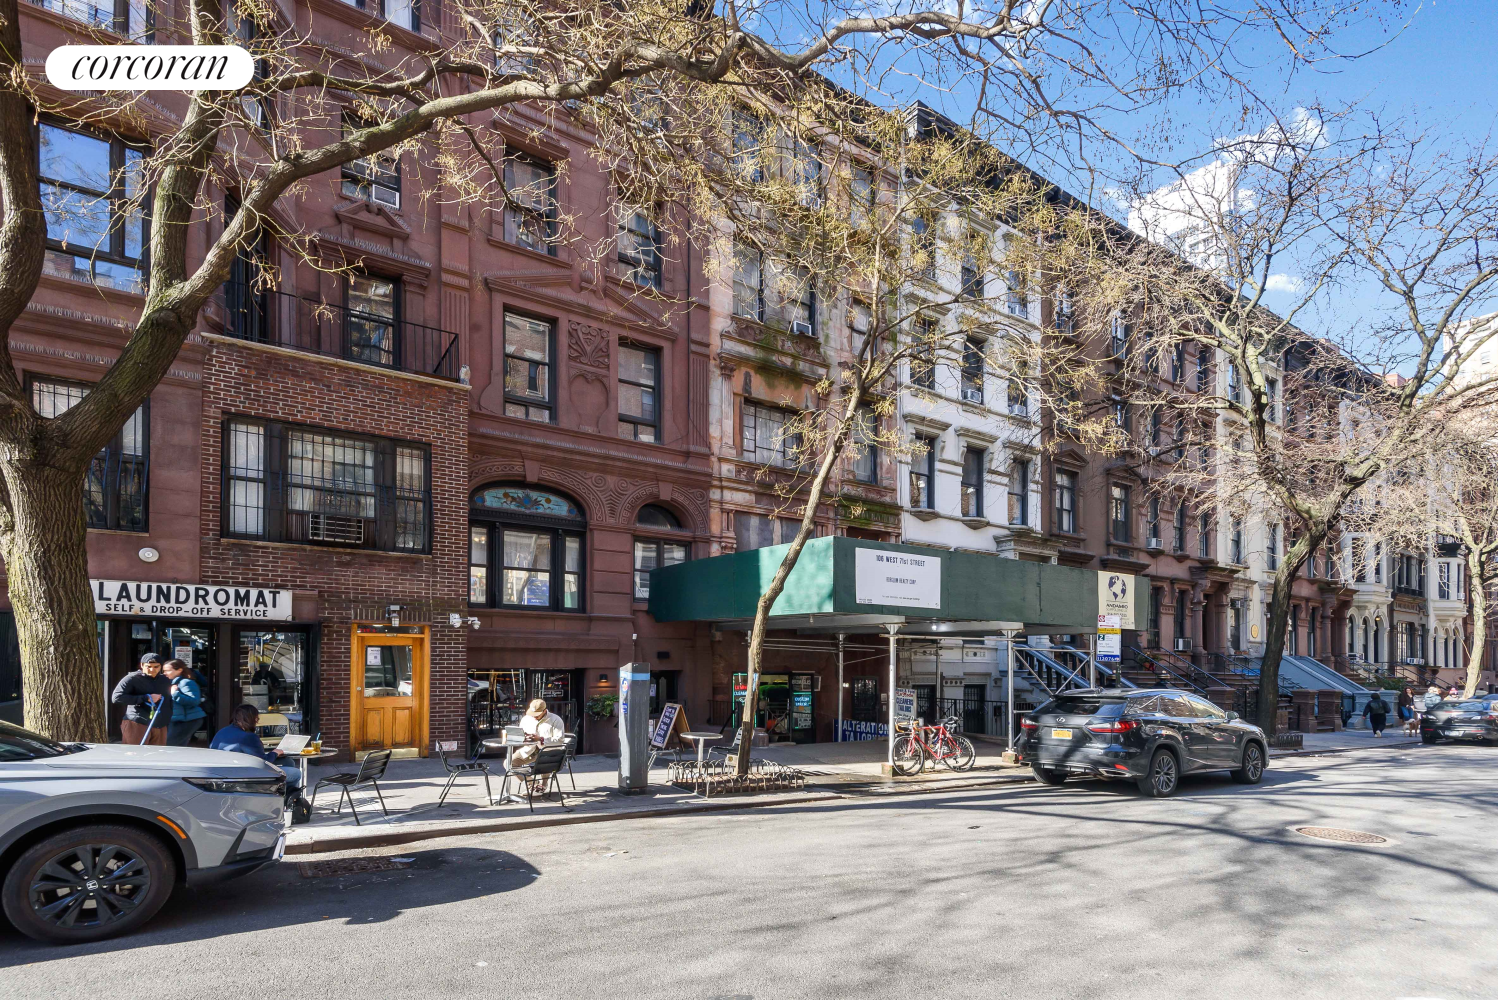 114 West 71st Street, Lincoln Sq, Upper West Side, NYC - 10 Bedrooms  
11 Bathrooms  
25 Rooms - 